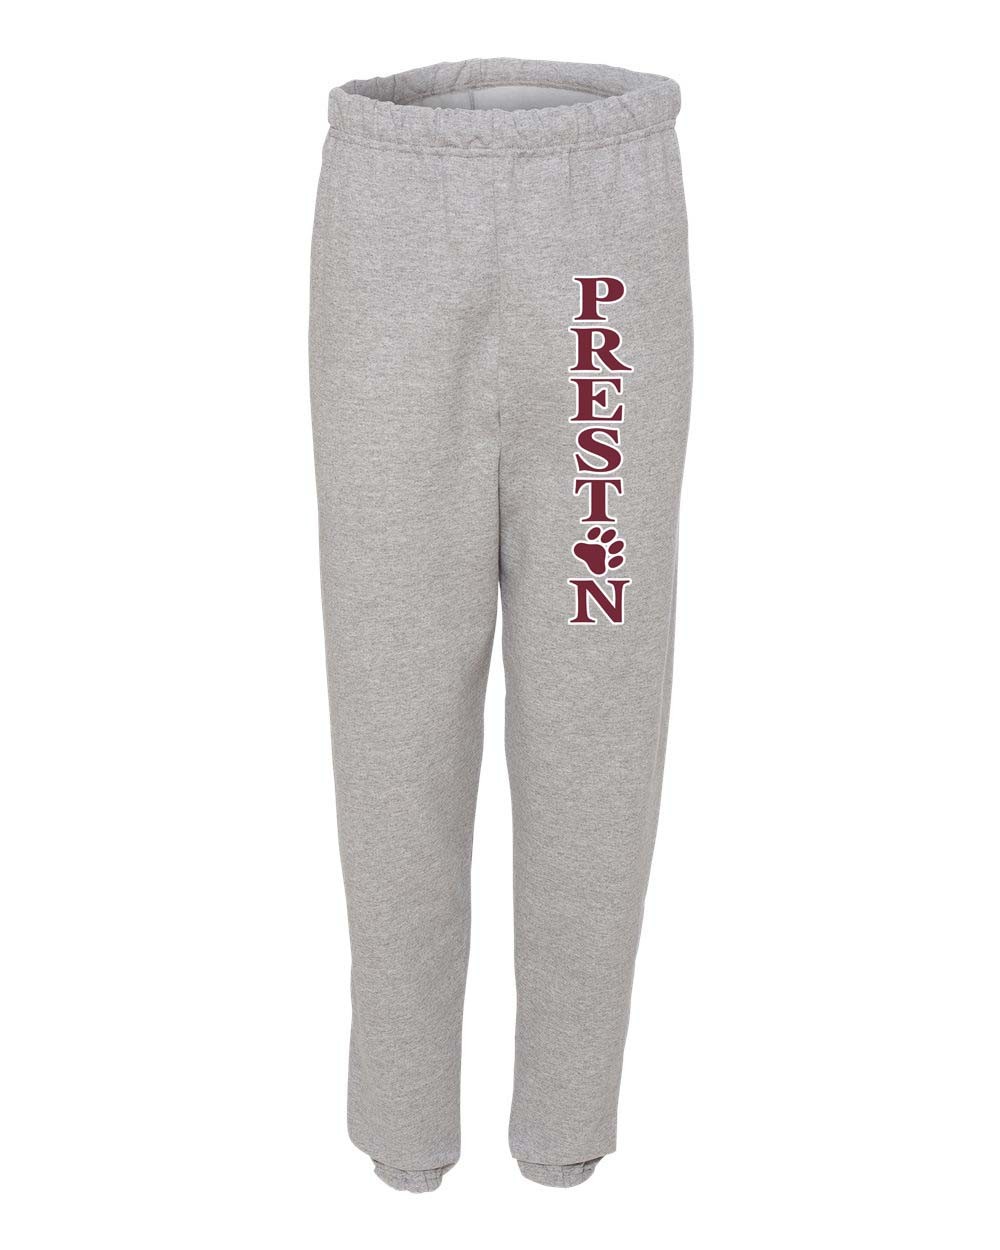 PHS Spirit Sweatpants w/ Paw Logo #10 - Please Allow 2-3 Weeks for Fulfillment